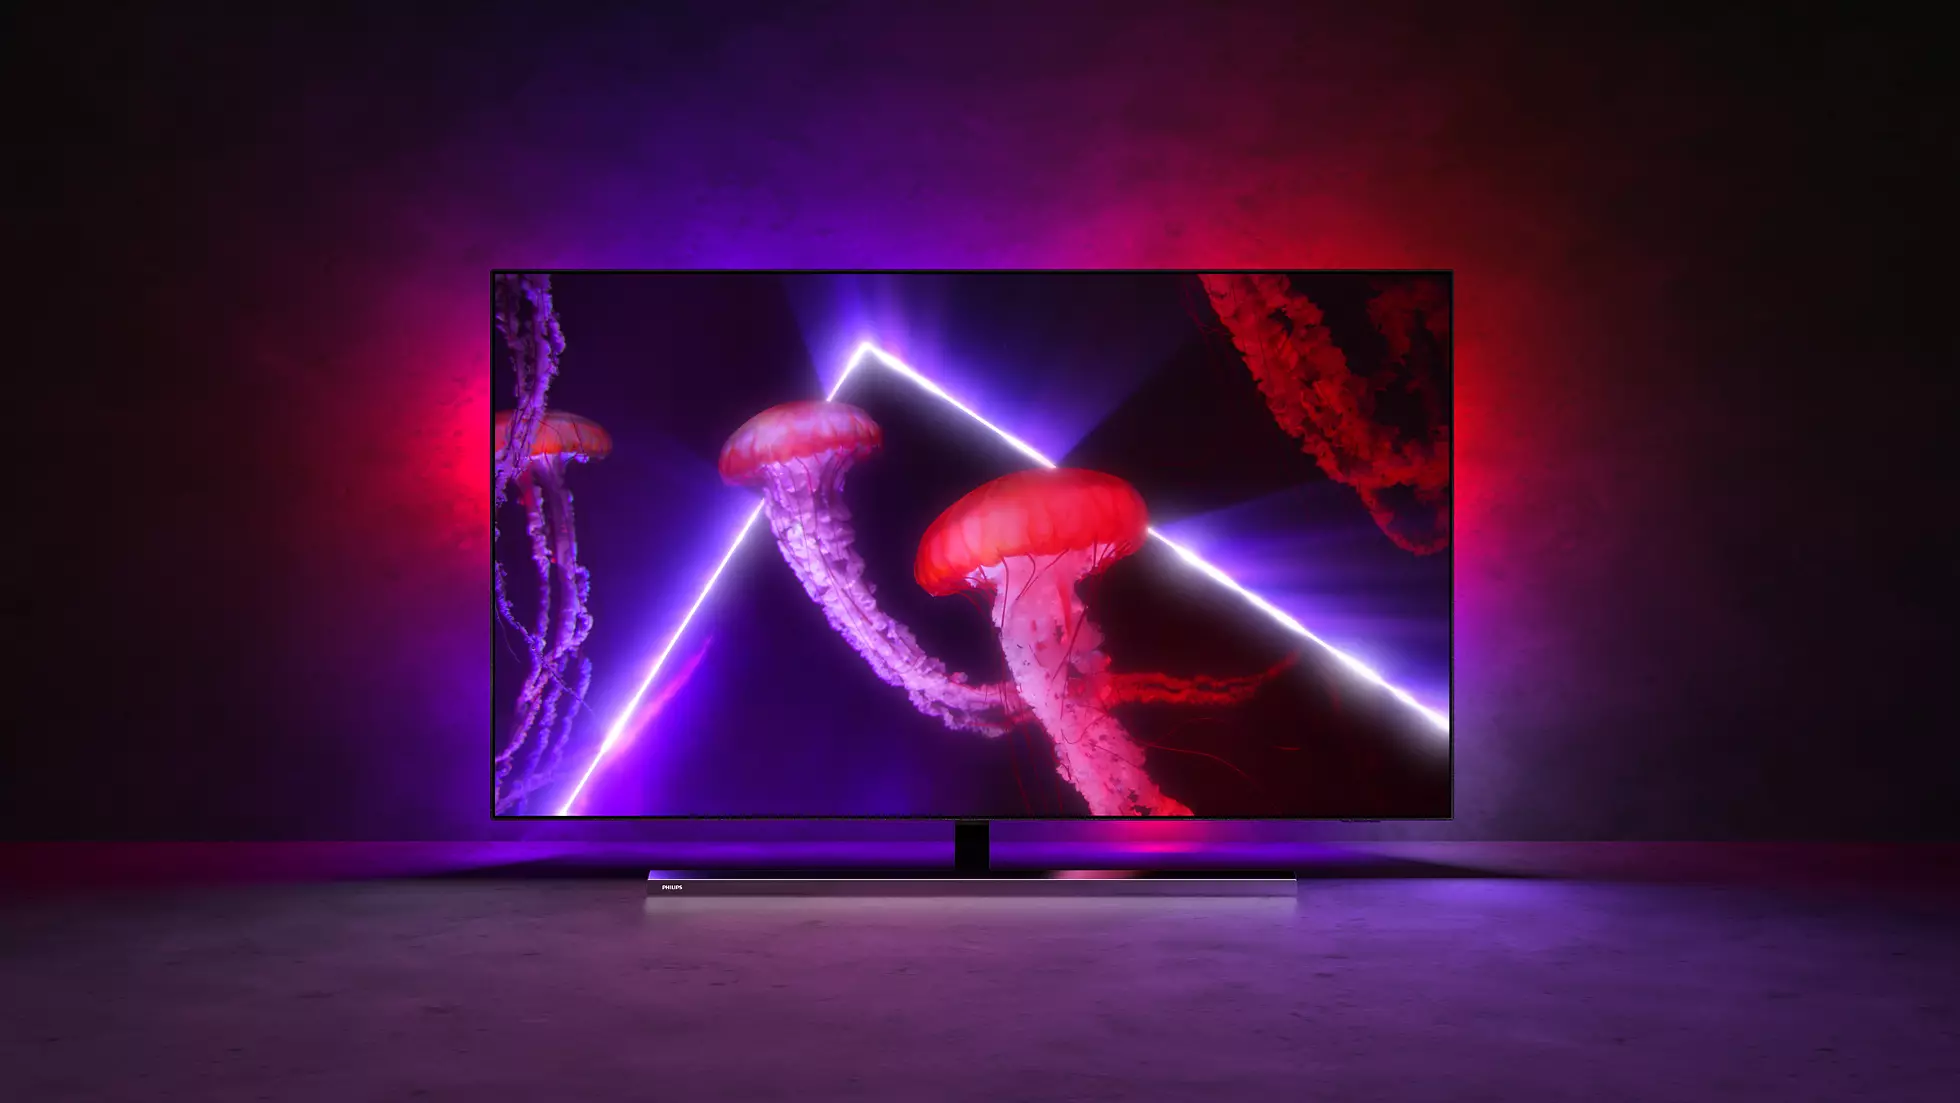 Ambilight TVs (16 products) compare prices today »